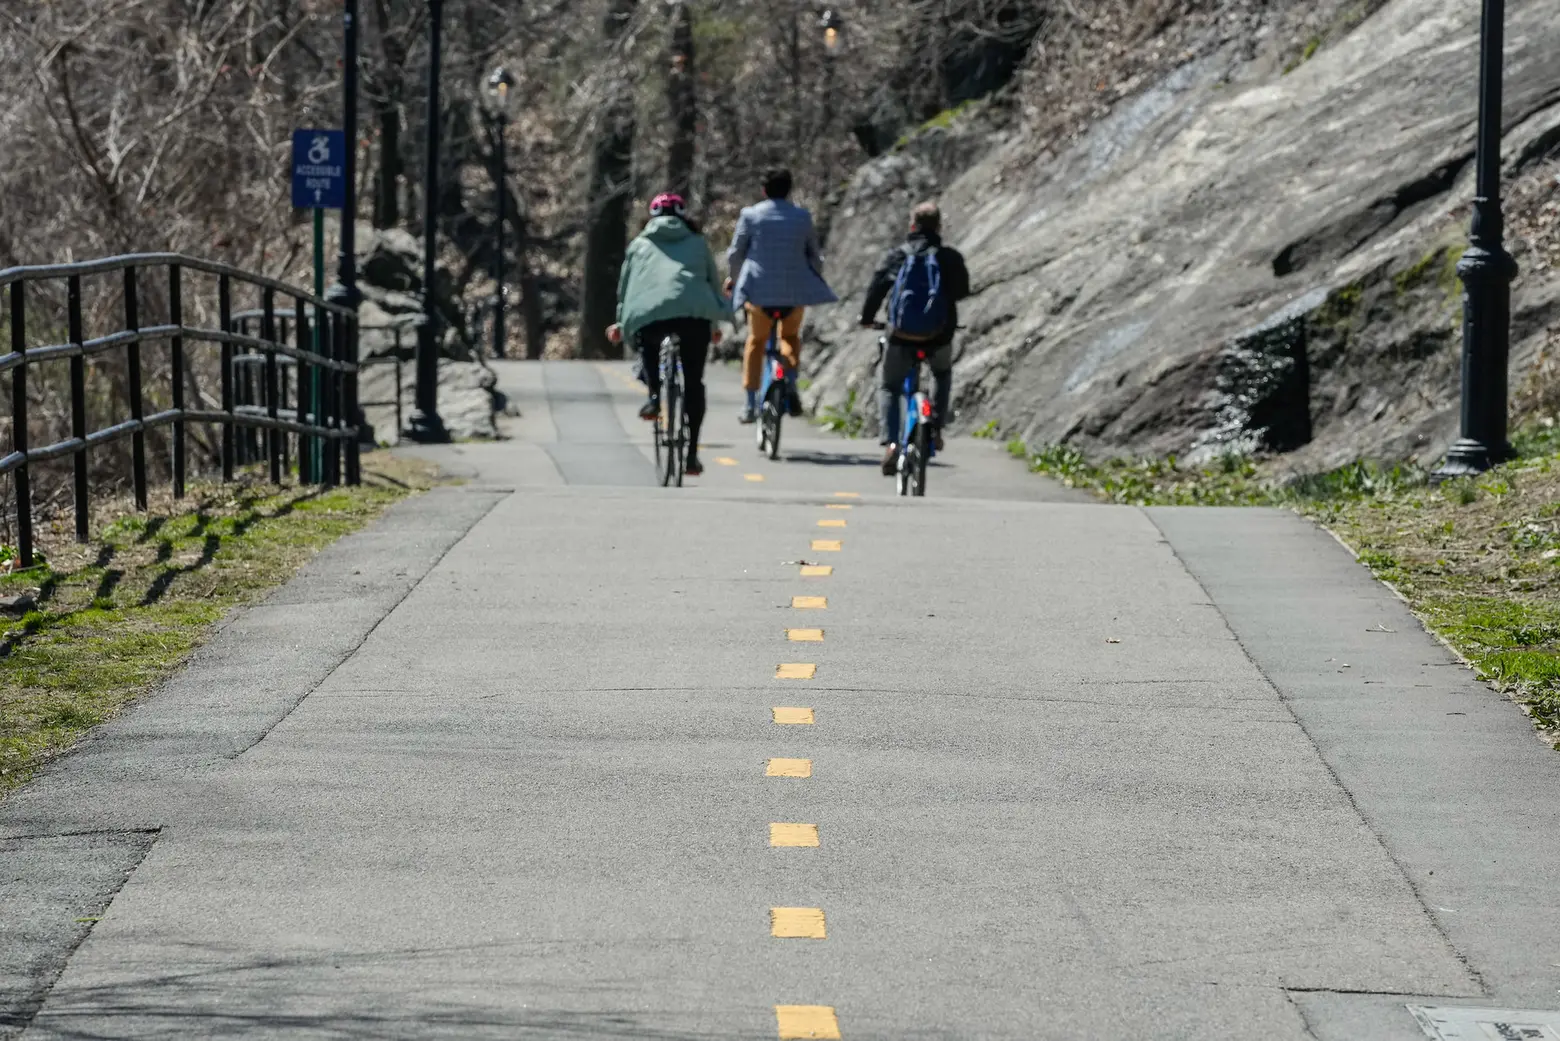 7-mile Harlem River Greenway expansion connects Randall’s Island to Van Cortlandt Park